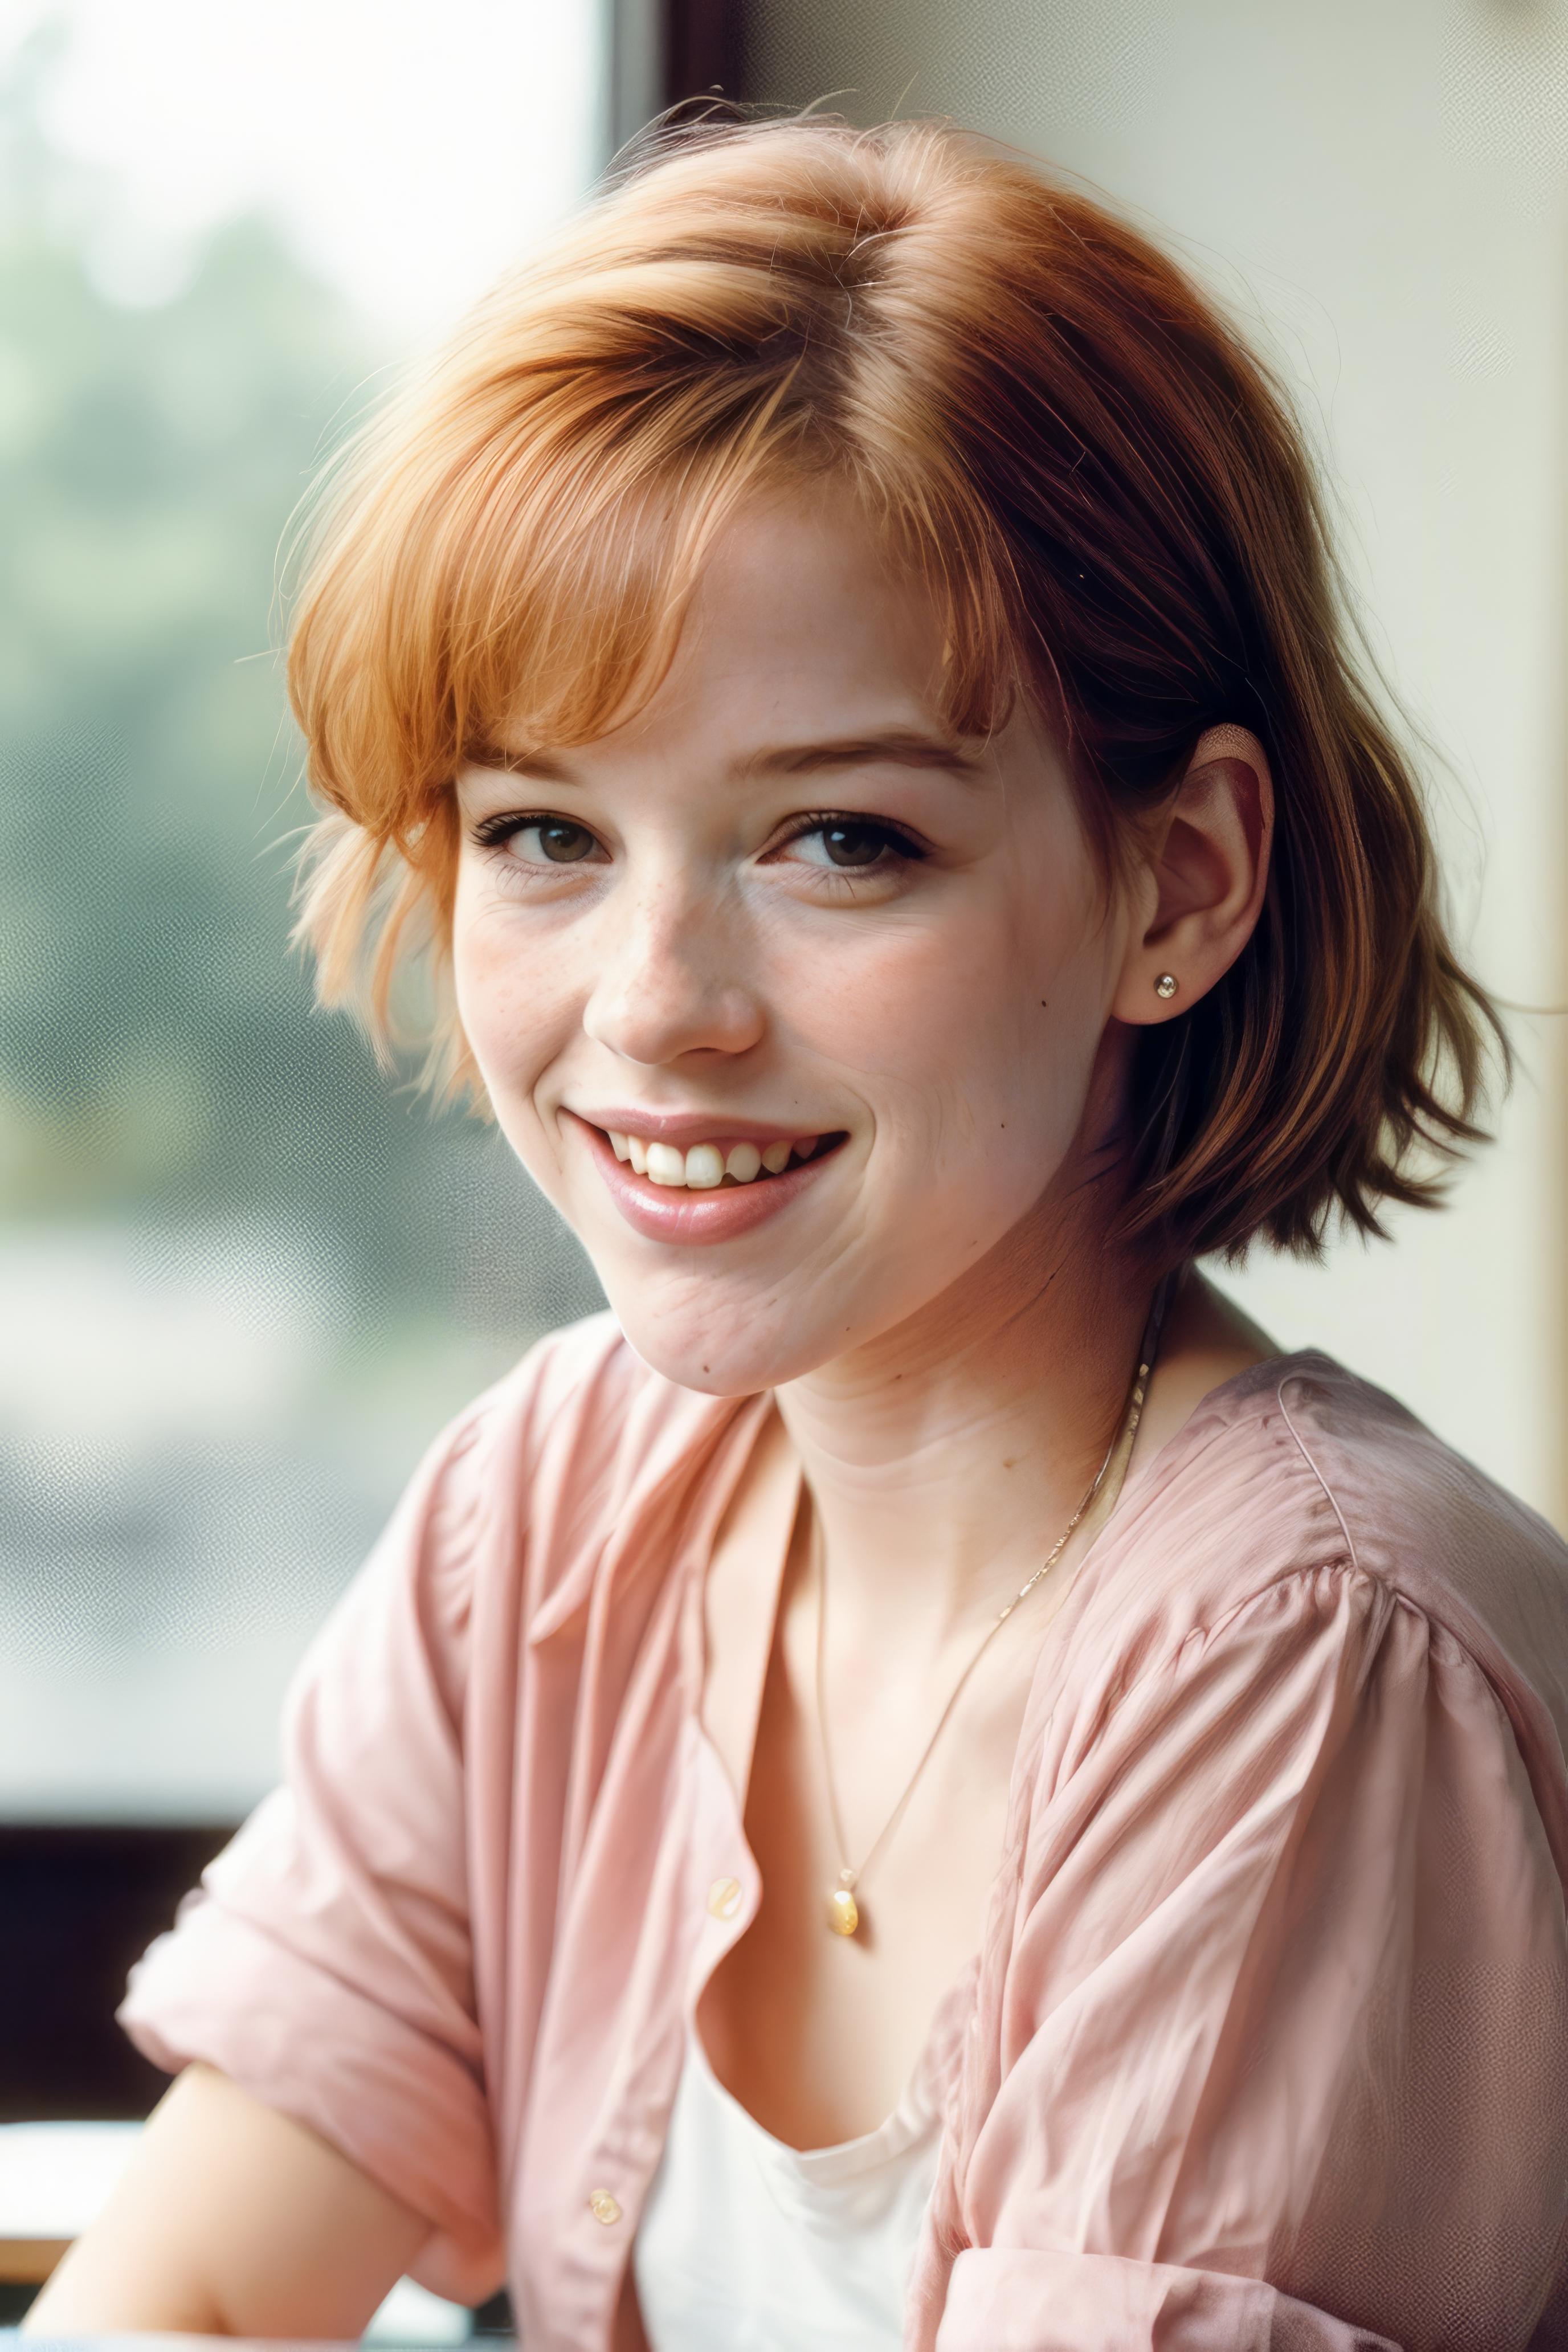 Molly Ringwald Younger years image by Cyberdelia